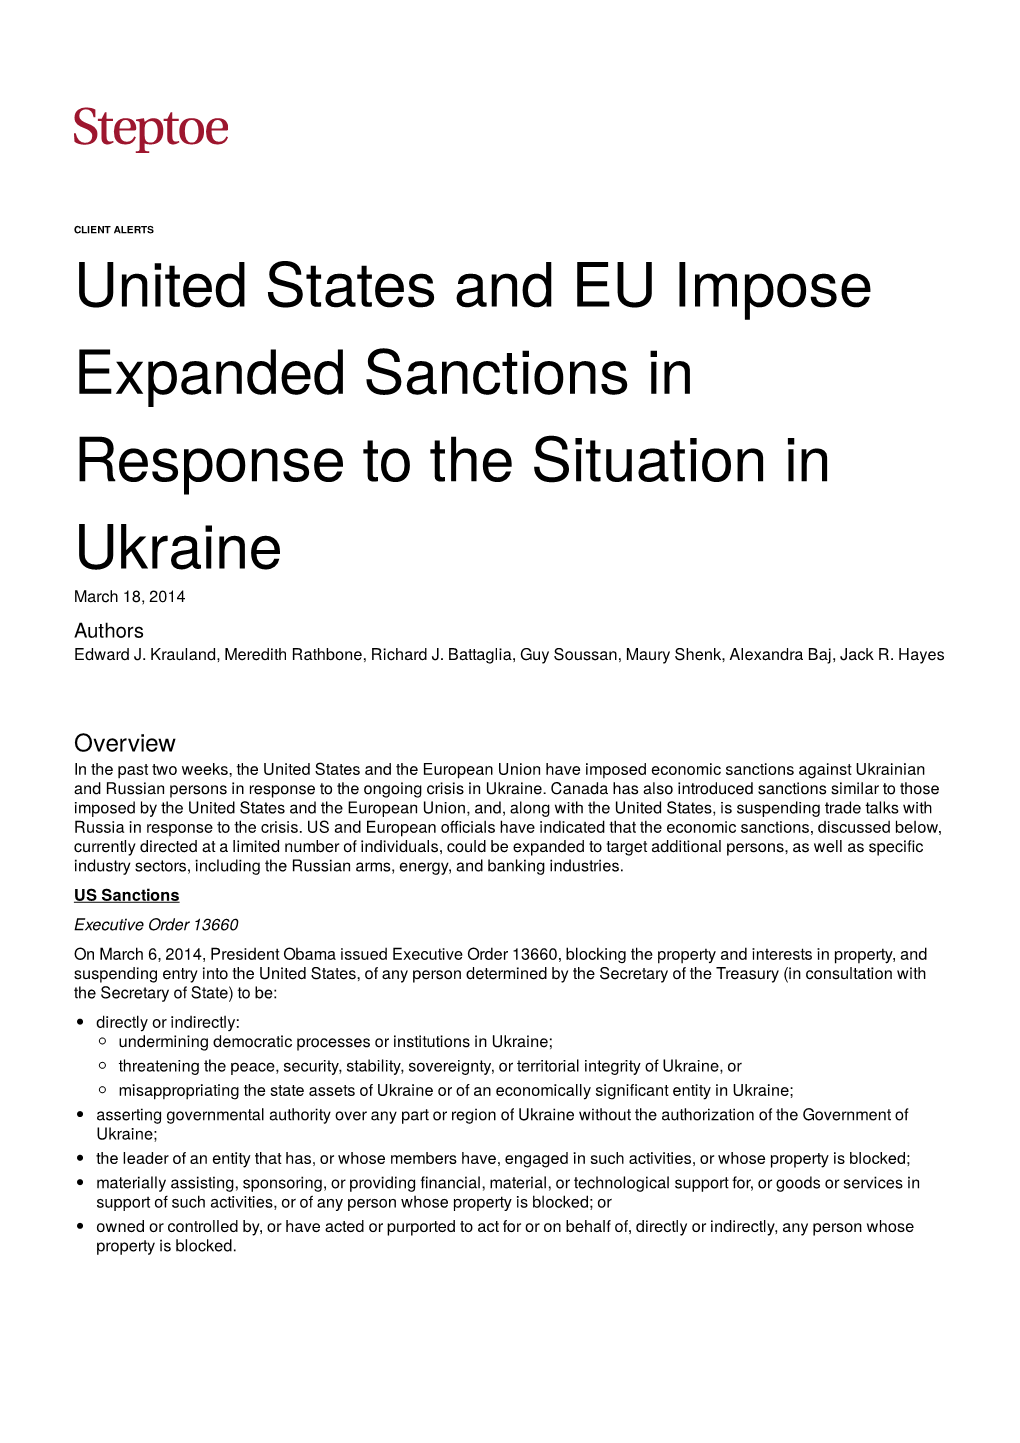 United States and EU Impose Expanded Sanctions in Response to the Situation in Ukraine